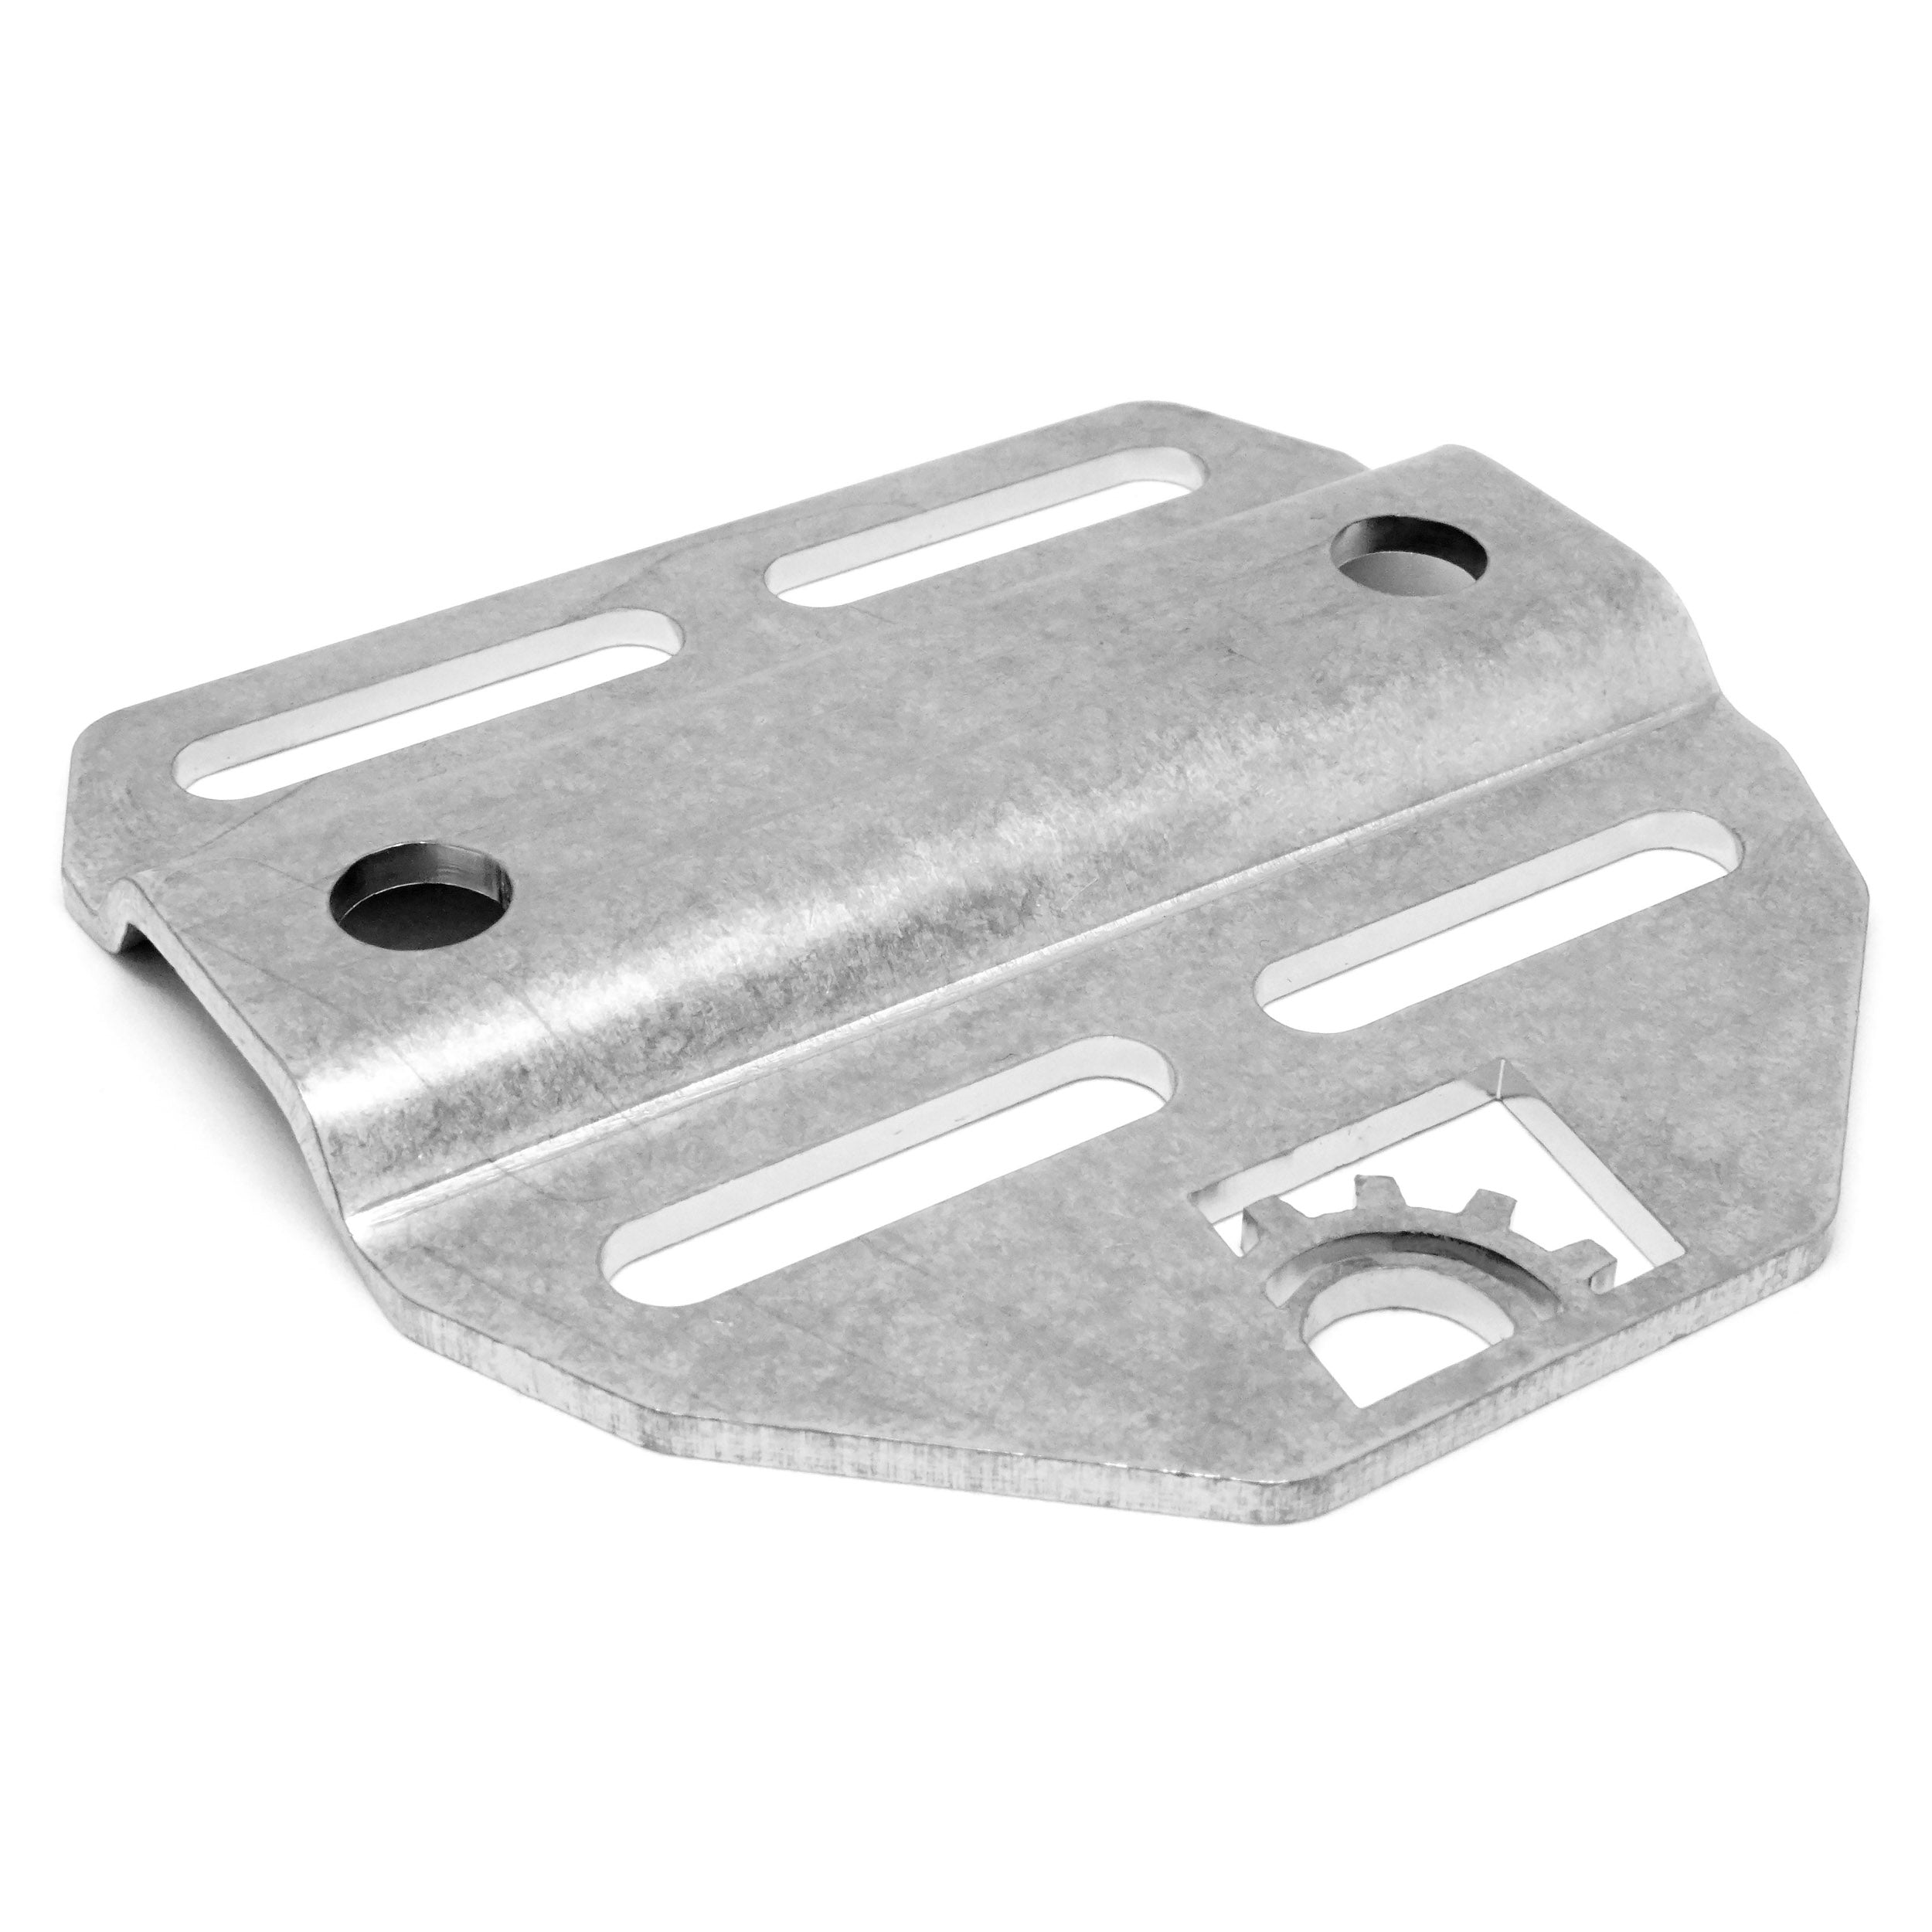 BuiltRight Industries Mount for RotopaX Mounting System